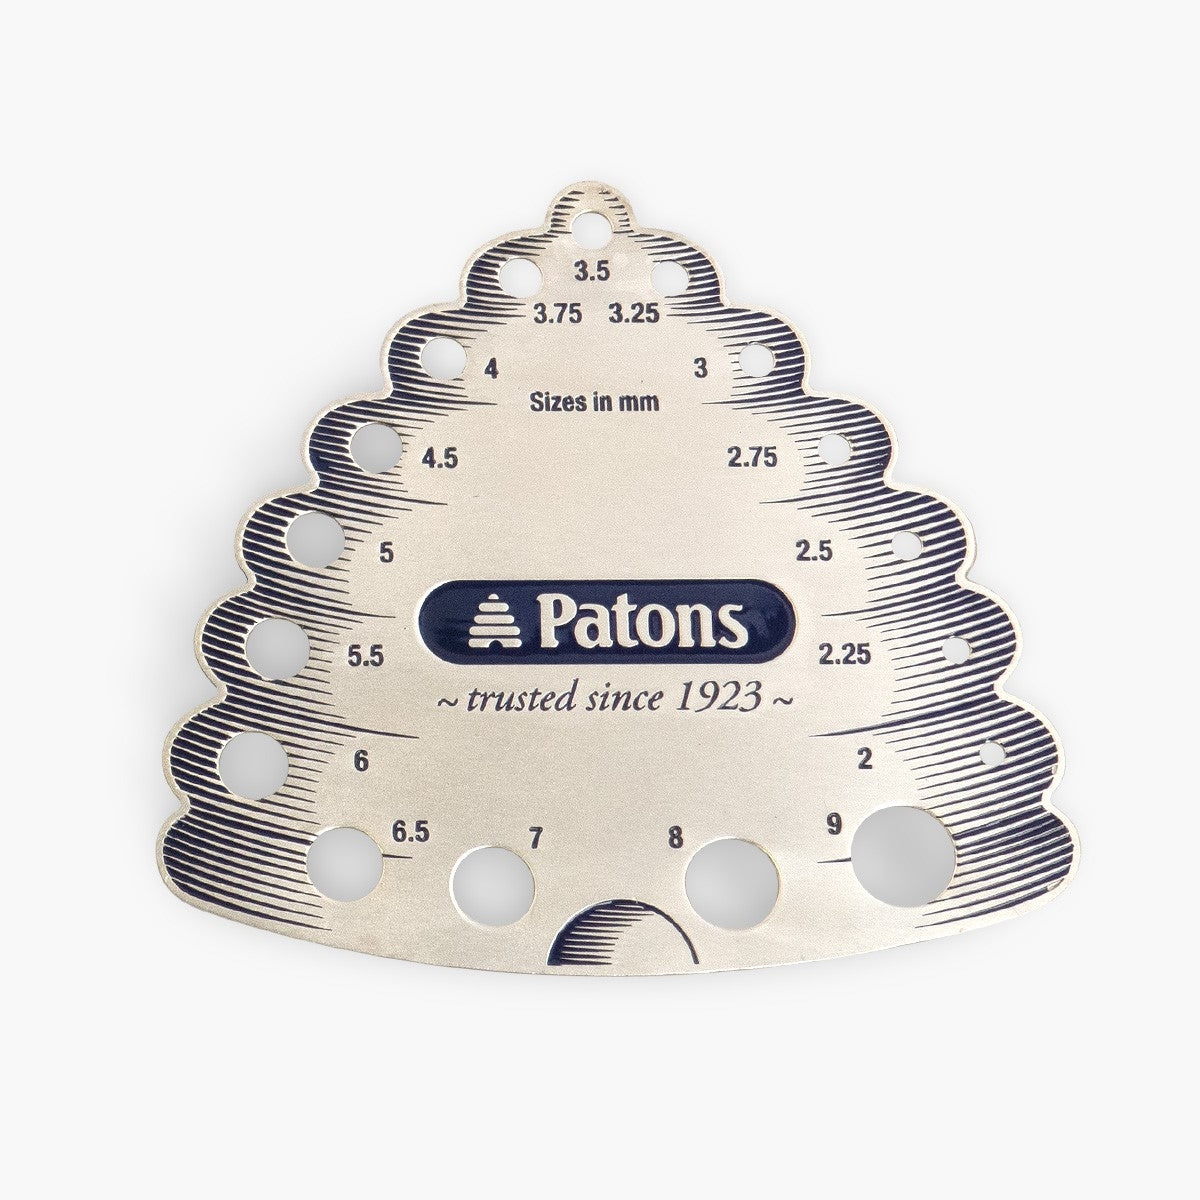 Patons 100 Year Beehive Gauge - Limited Edition